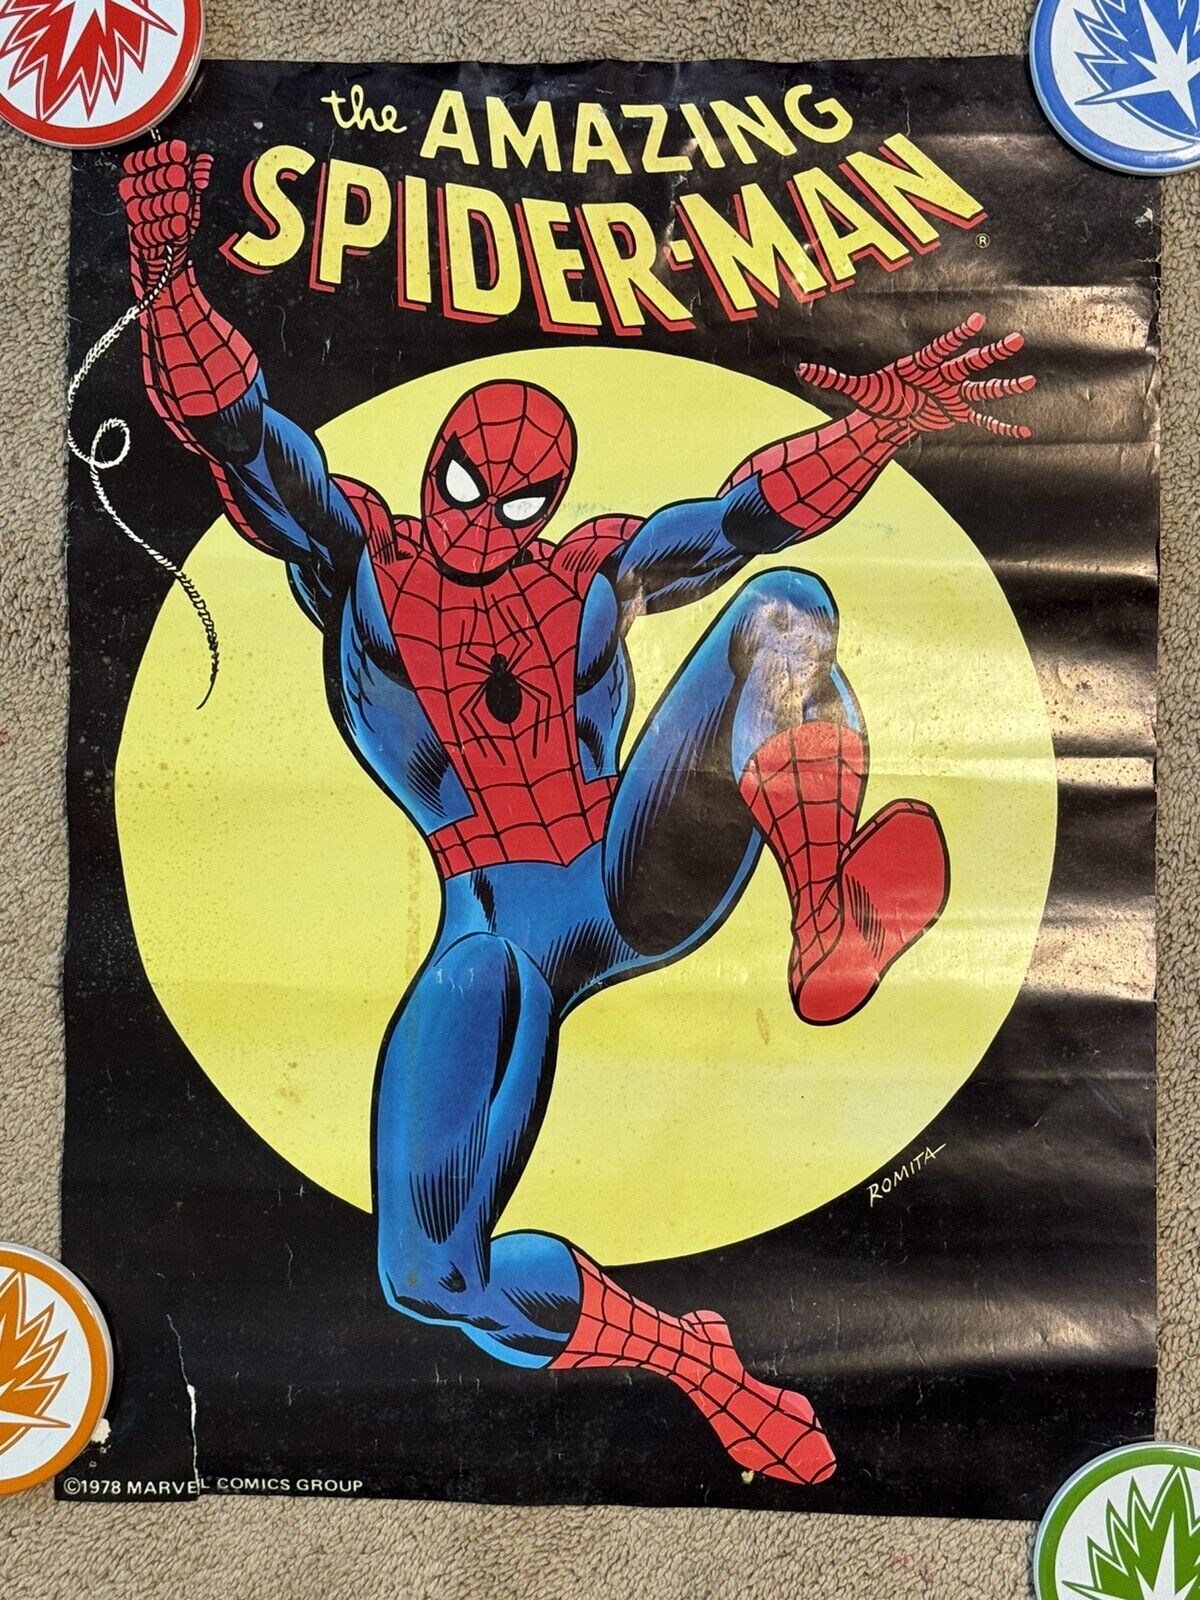 1978 Vintage The Amazing Spider-Man Poster by Romita Marvel Comics Group